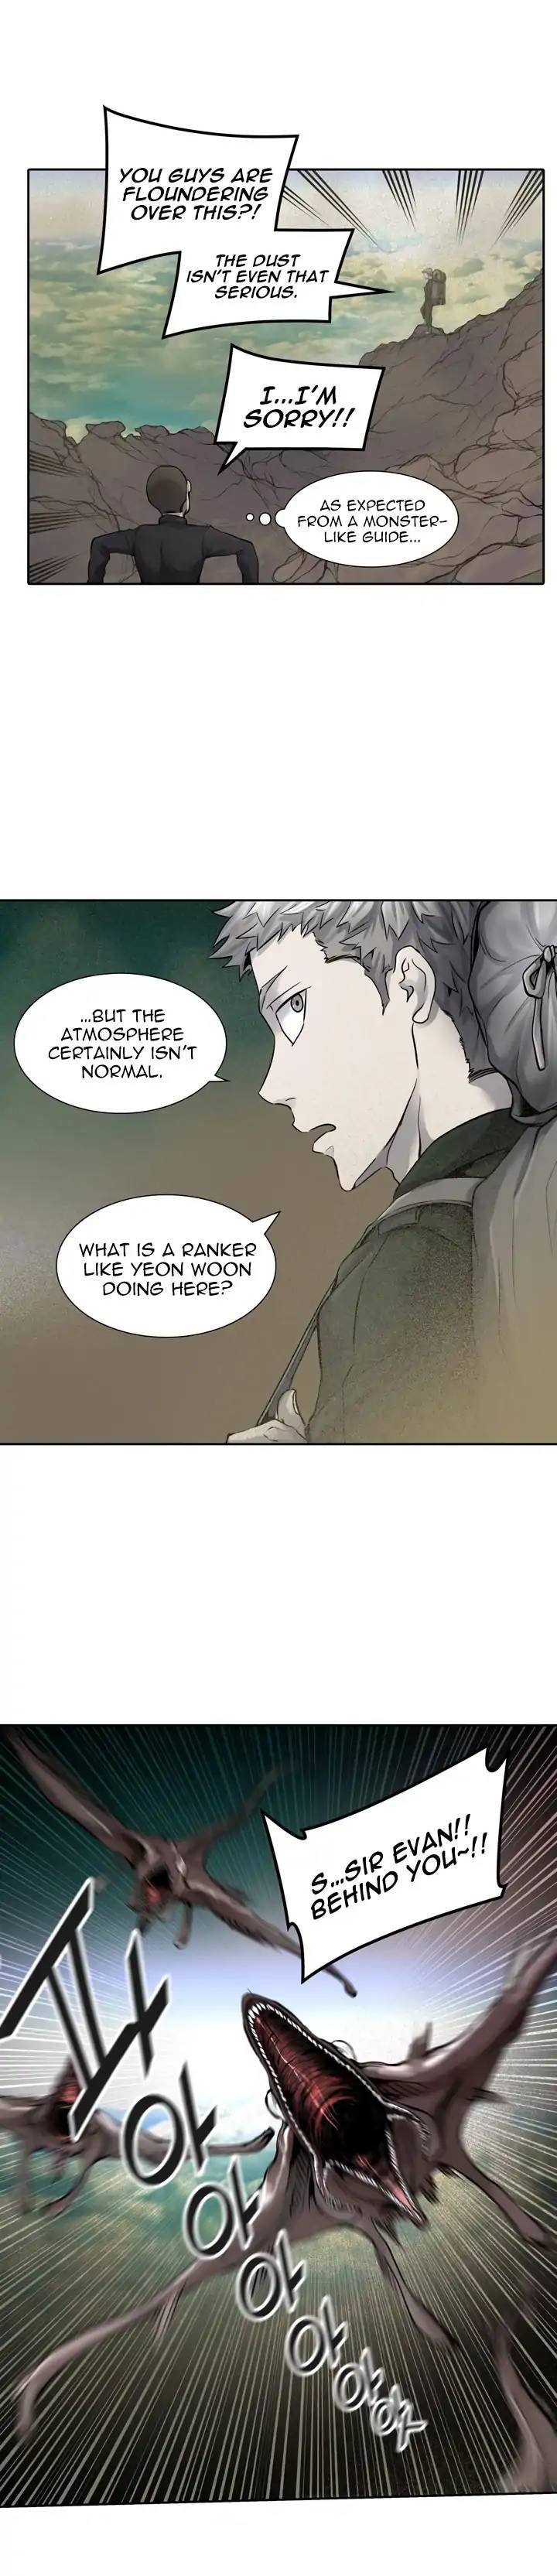 Tower Of God 418 6